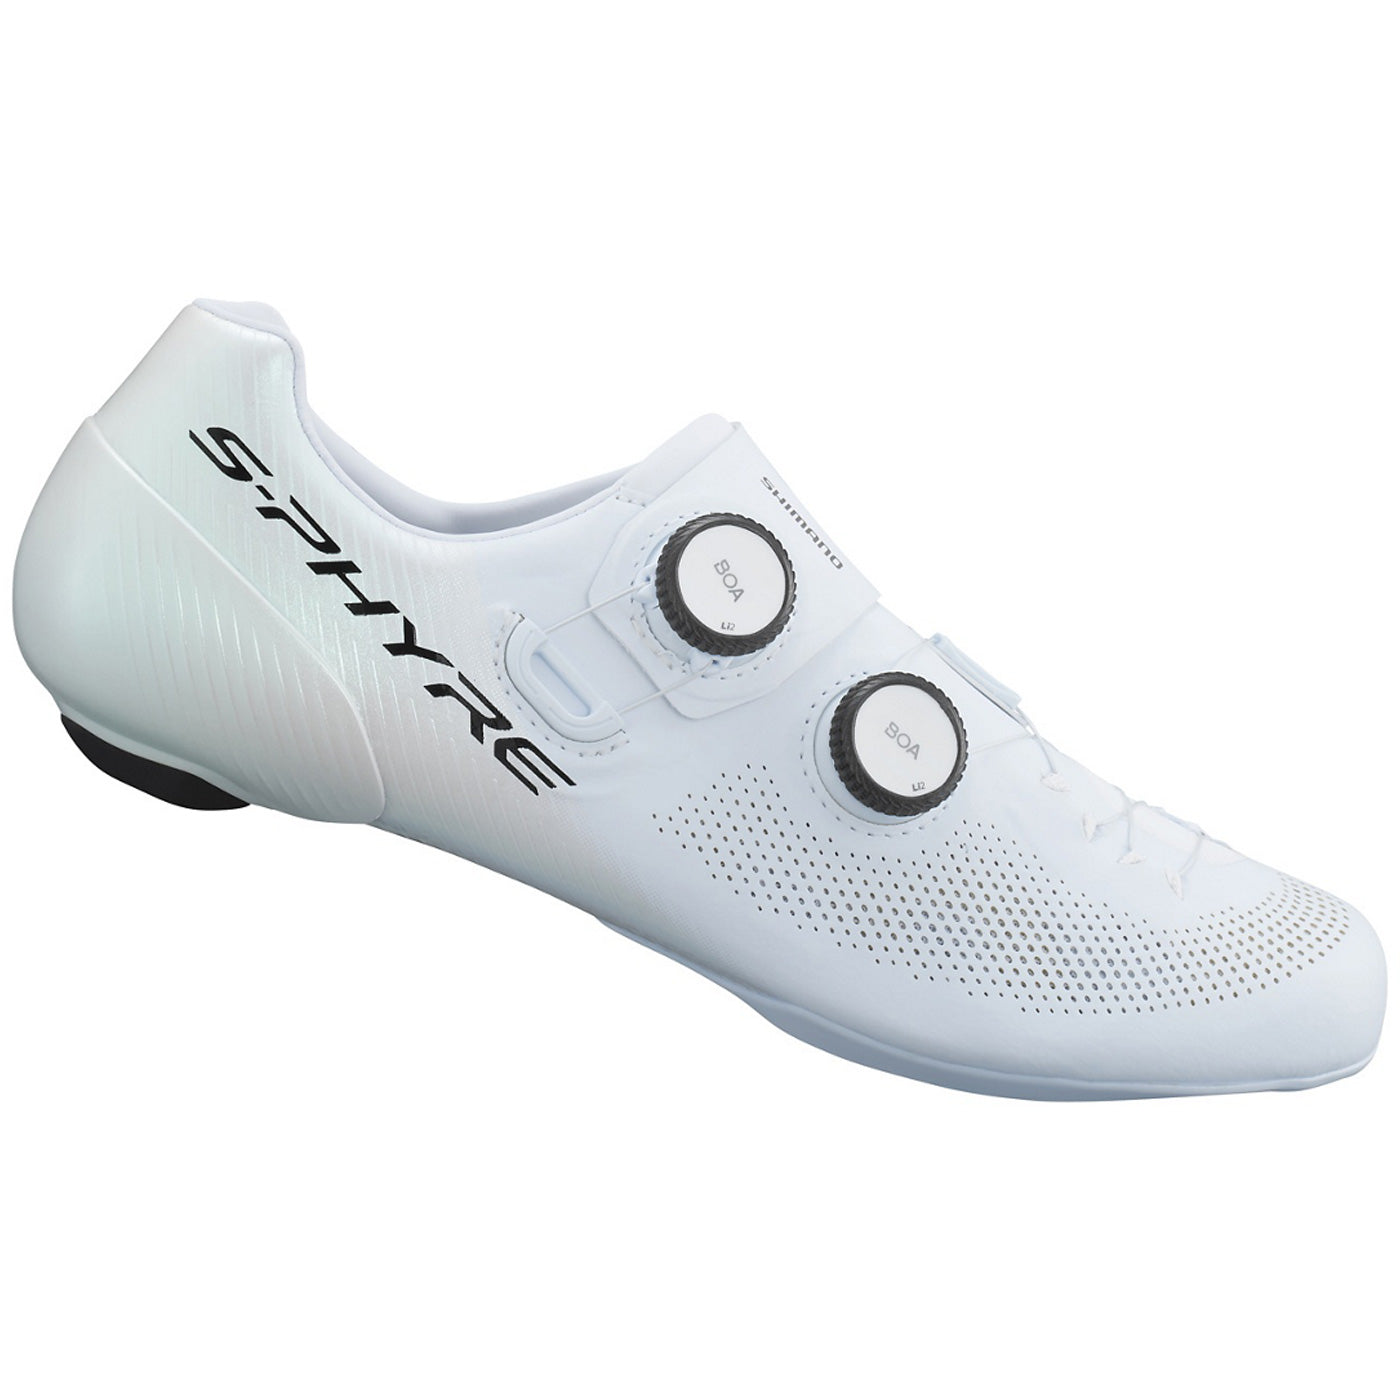 Chaussures Shimano S-Phyre RC903 - Blanc